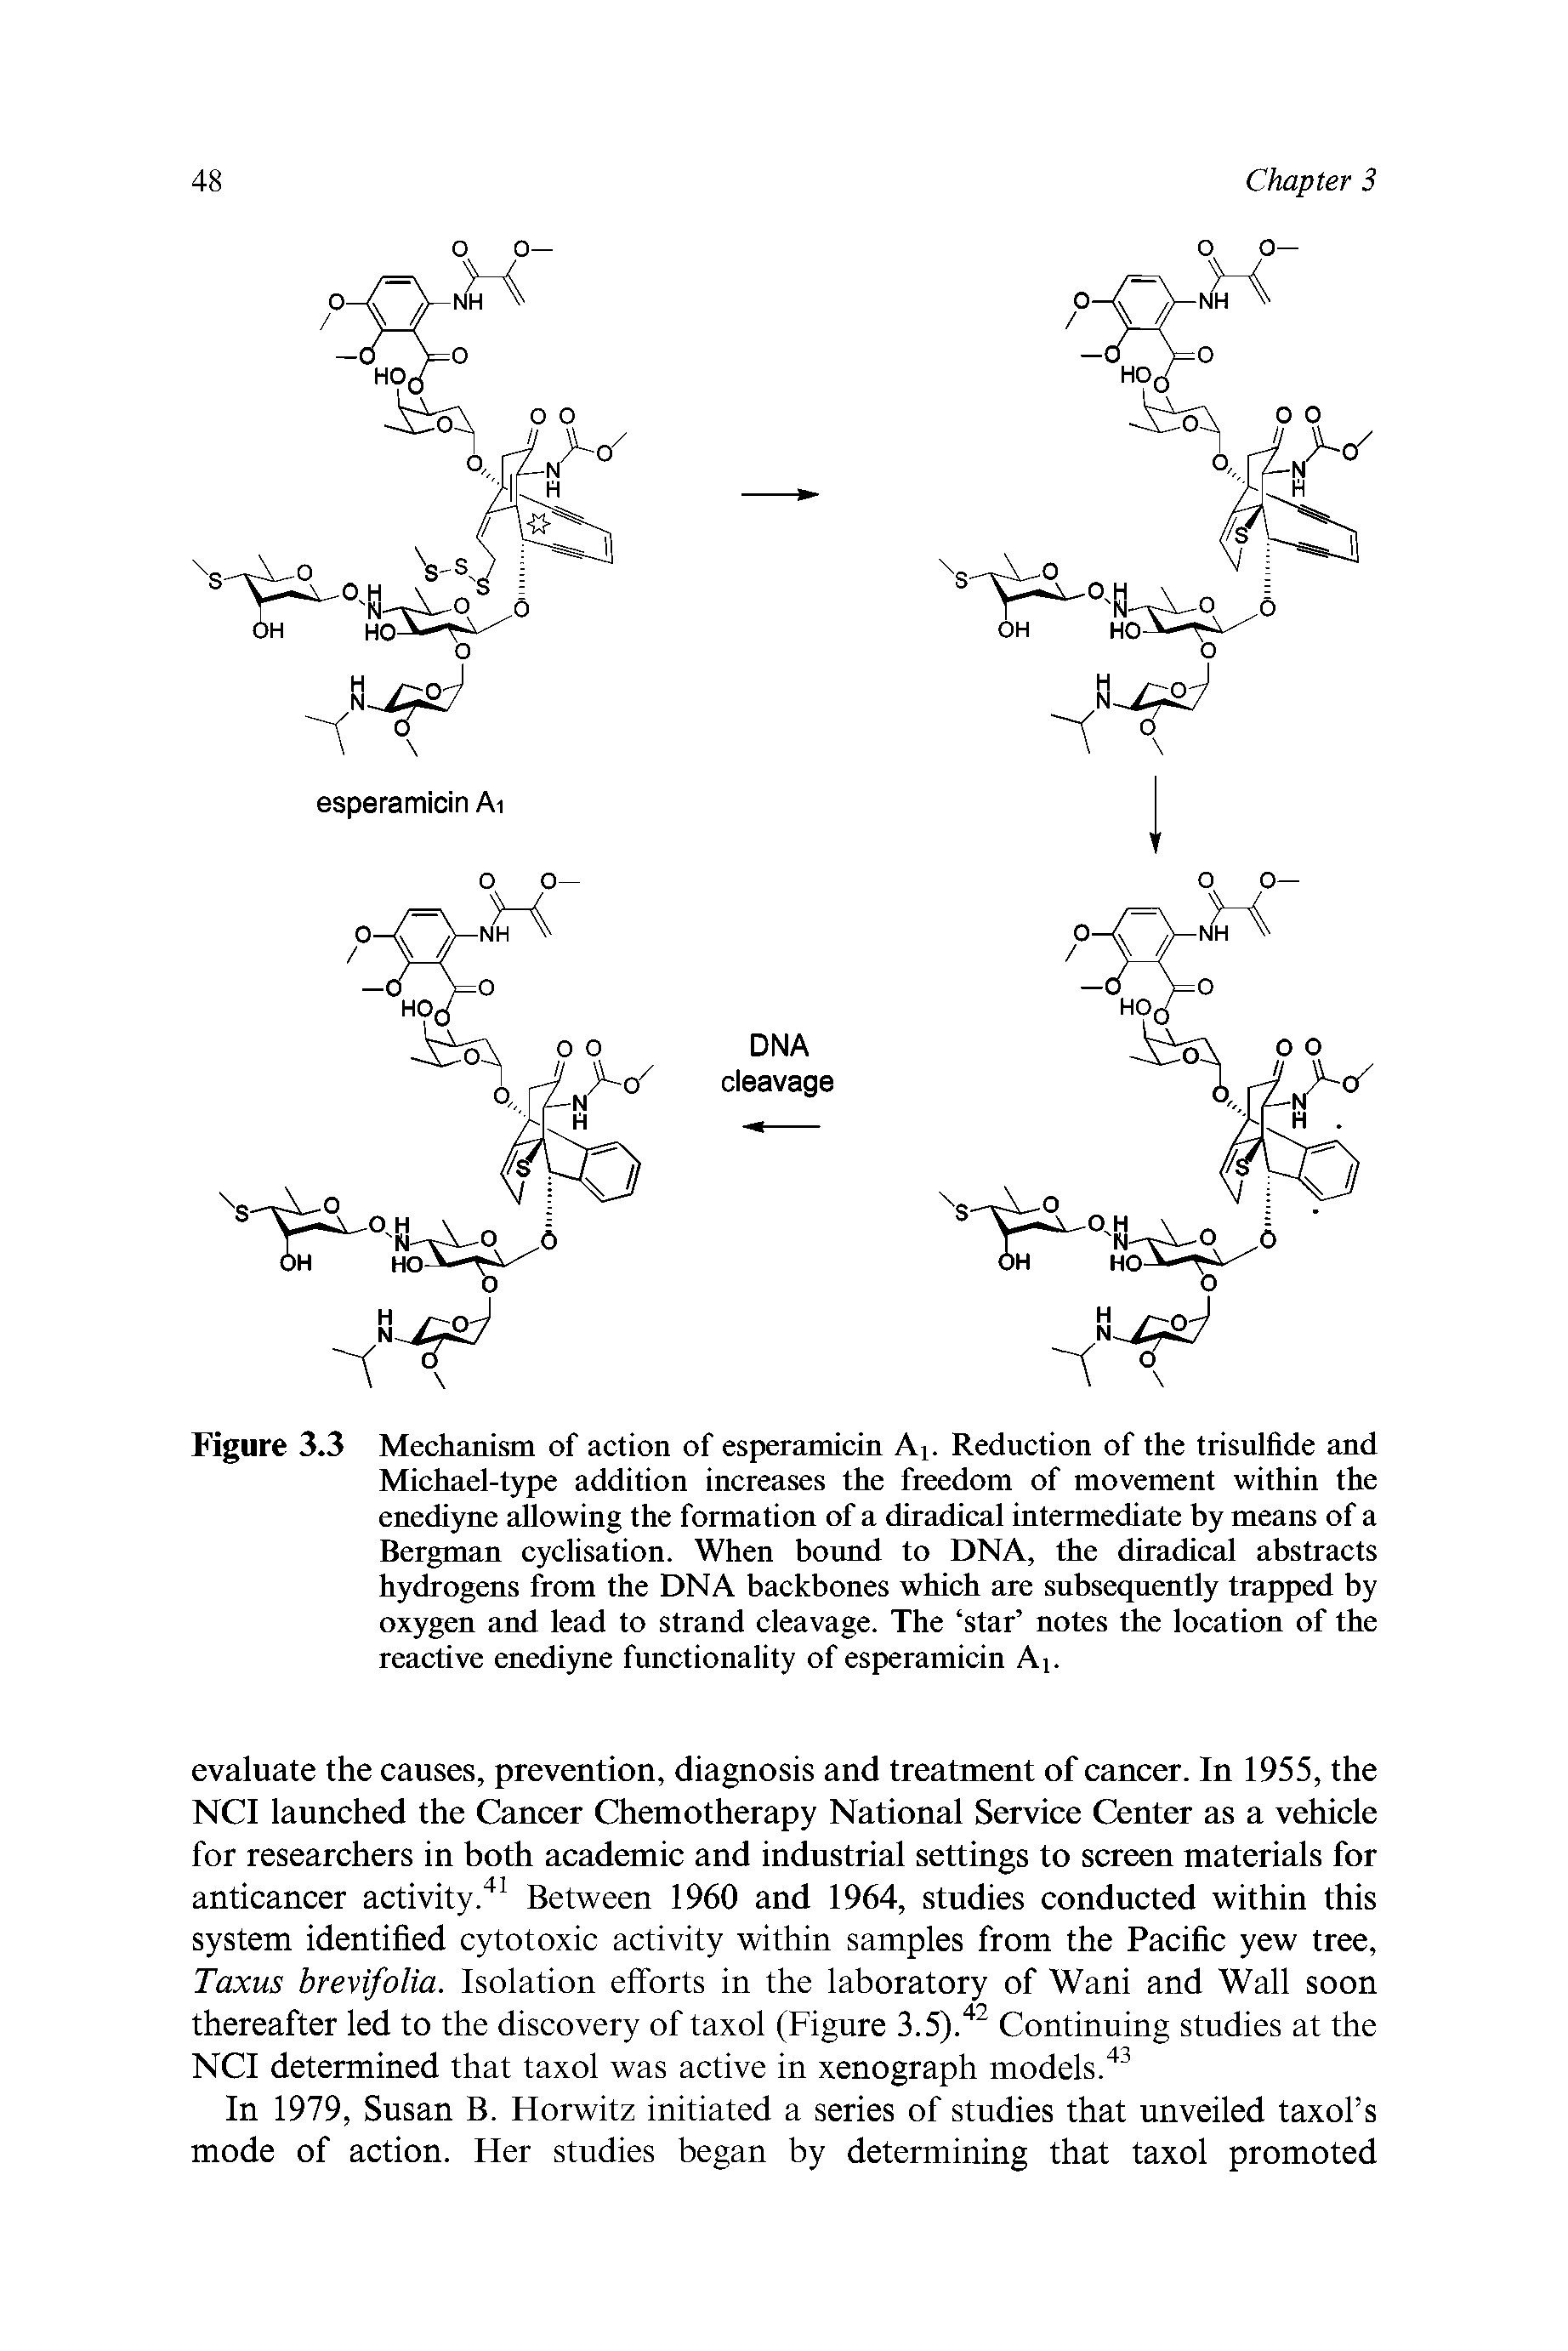 Figure 3.3 Mechanism of action of esperamicin A i. Reduction of the trisulfide and Michael-type addition increases the freedom of movement within the enediyne allowing the formation of a diradical intermediate by means of a Bergman cyclisation. When bound to DNA, the diradical abstracts hydrogens from the DNA backbones which are subsequently trapped by oxygen and lead to strand cleavage. The star notes the location of the reactive enediyne functionality of esperamicin Ai.